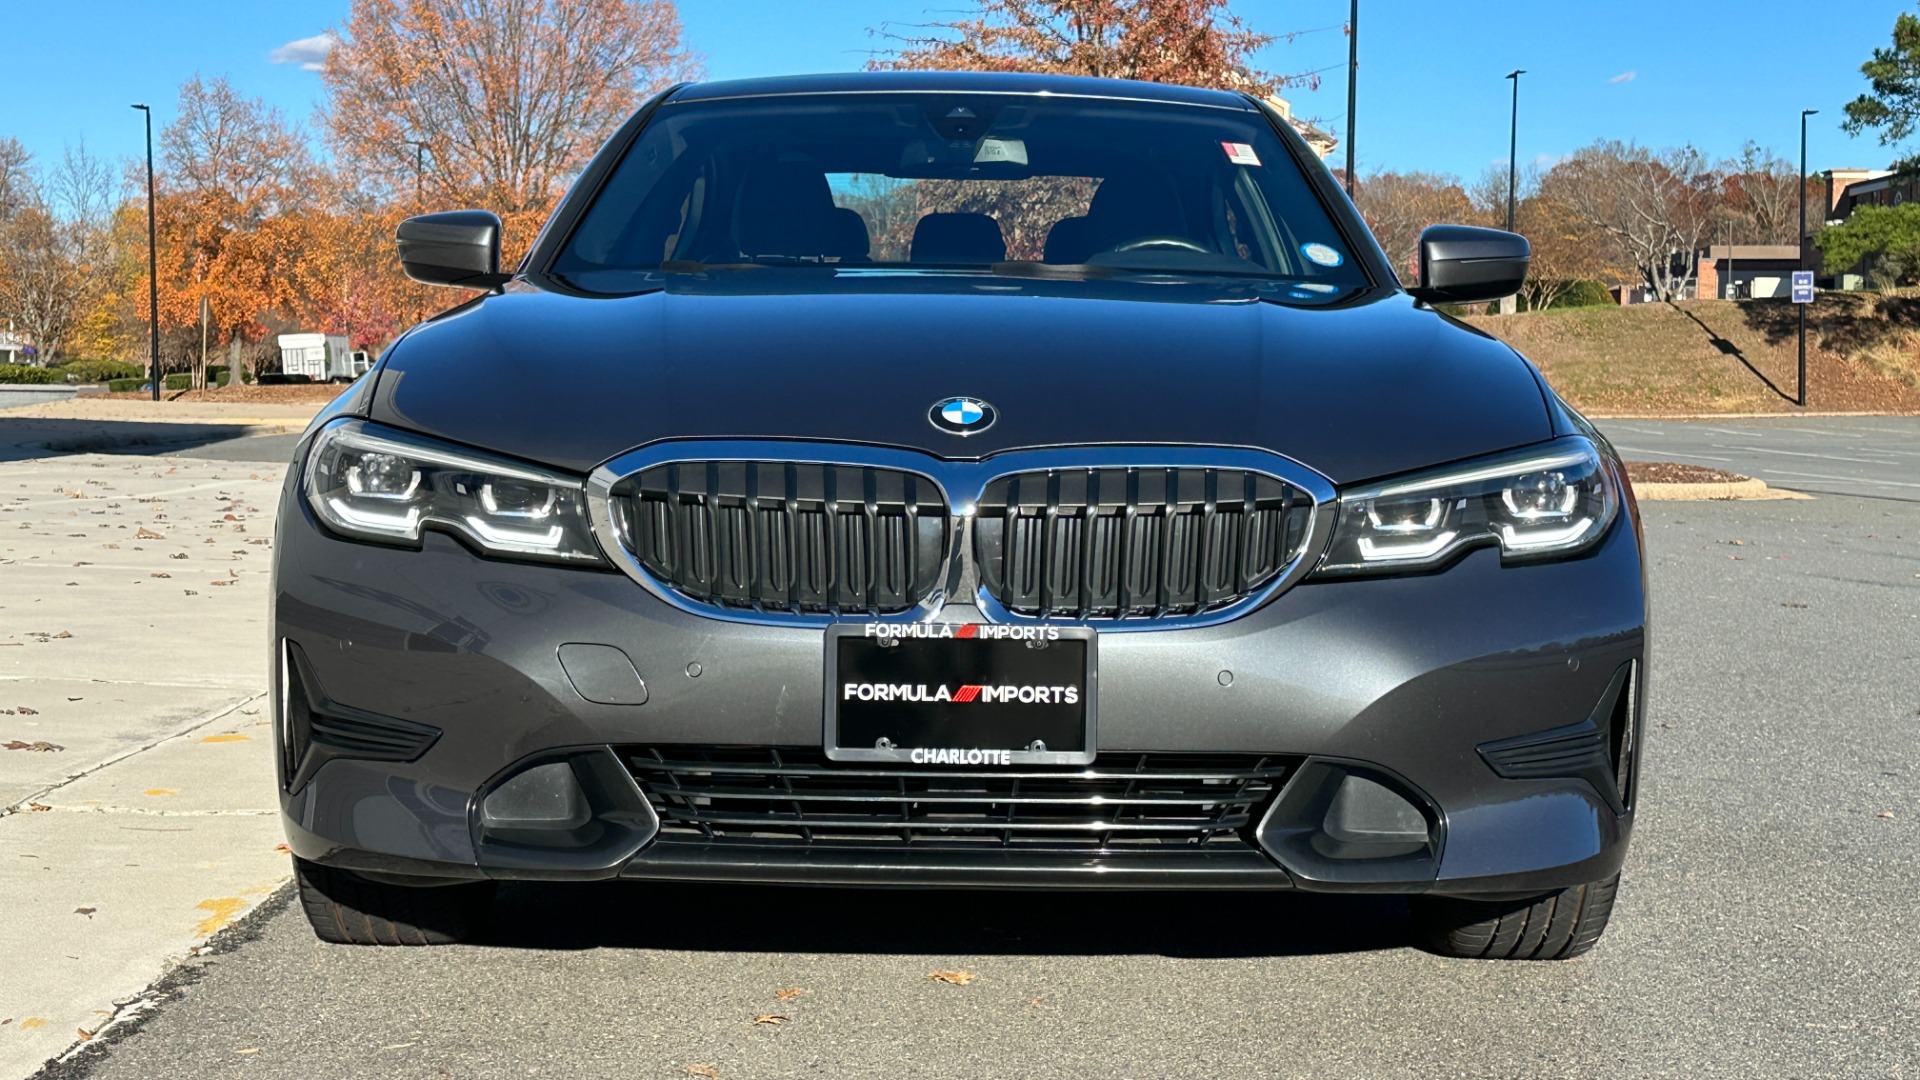 Used 2020 BMW 3 Series 330i xDRIVE / CONVENIENCE / HEATED SEATS / AMBIENT LIGHTING / REMOTE START for sale $36,995 at Formula Imports in Charlotte NC 28227 8